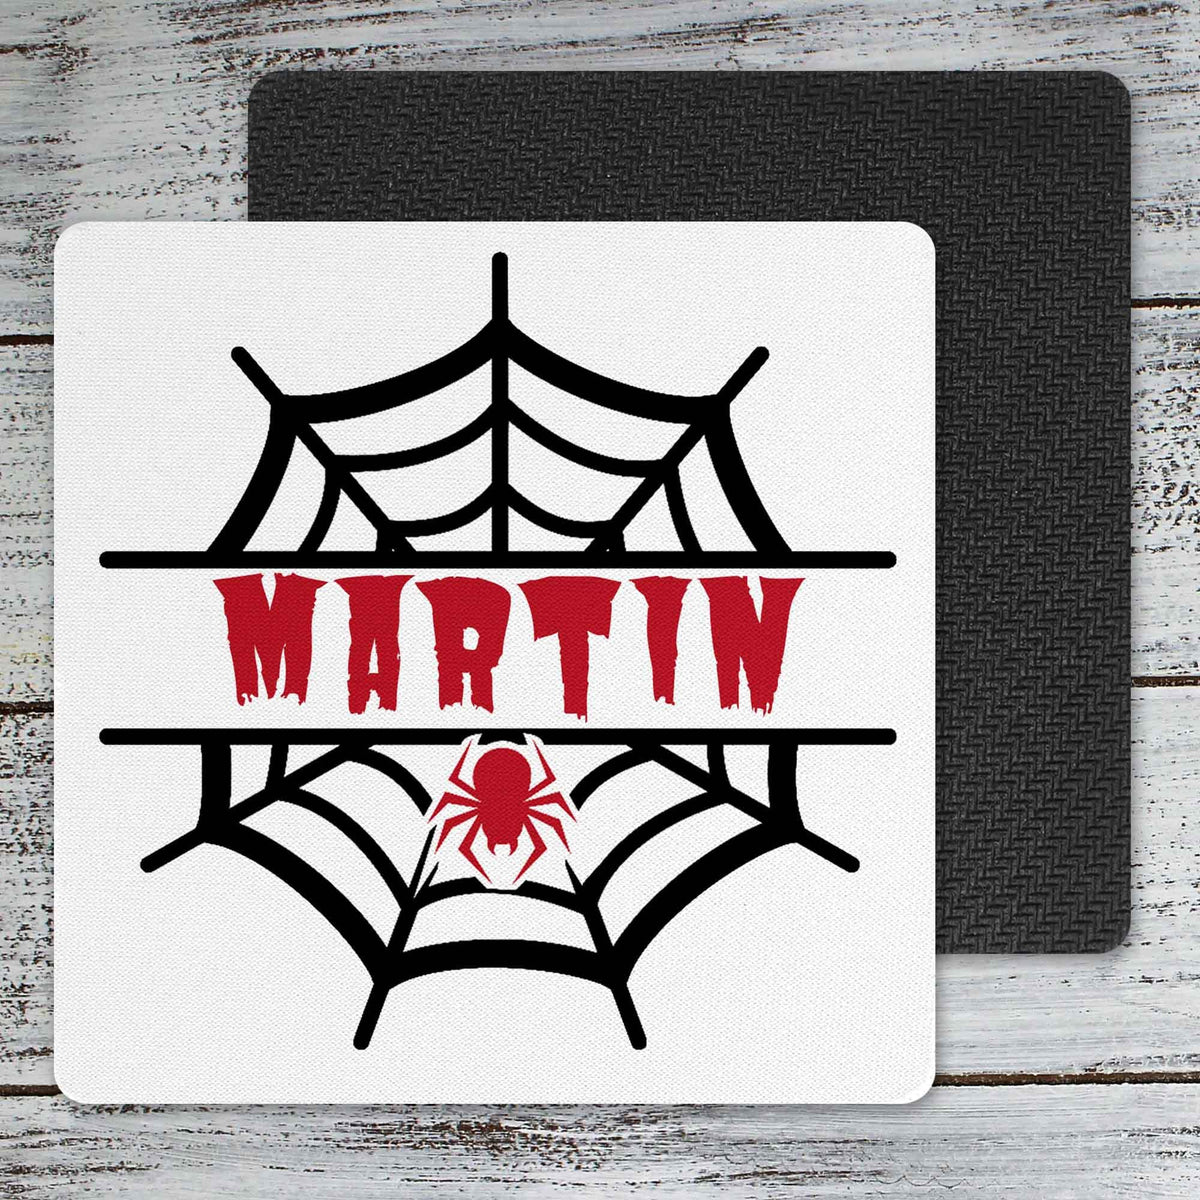 Personalized Coasters | Custom Stone Coaster Set | Spider Red | Set of 4